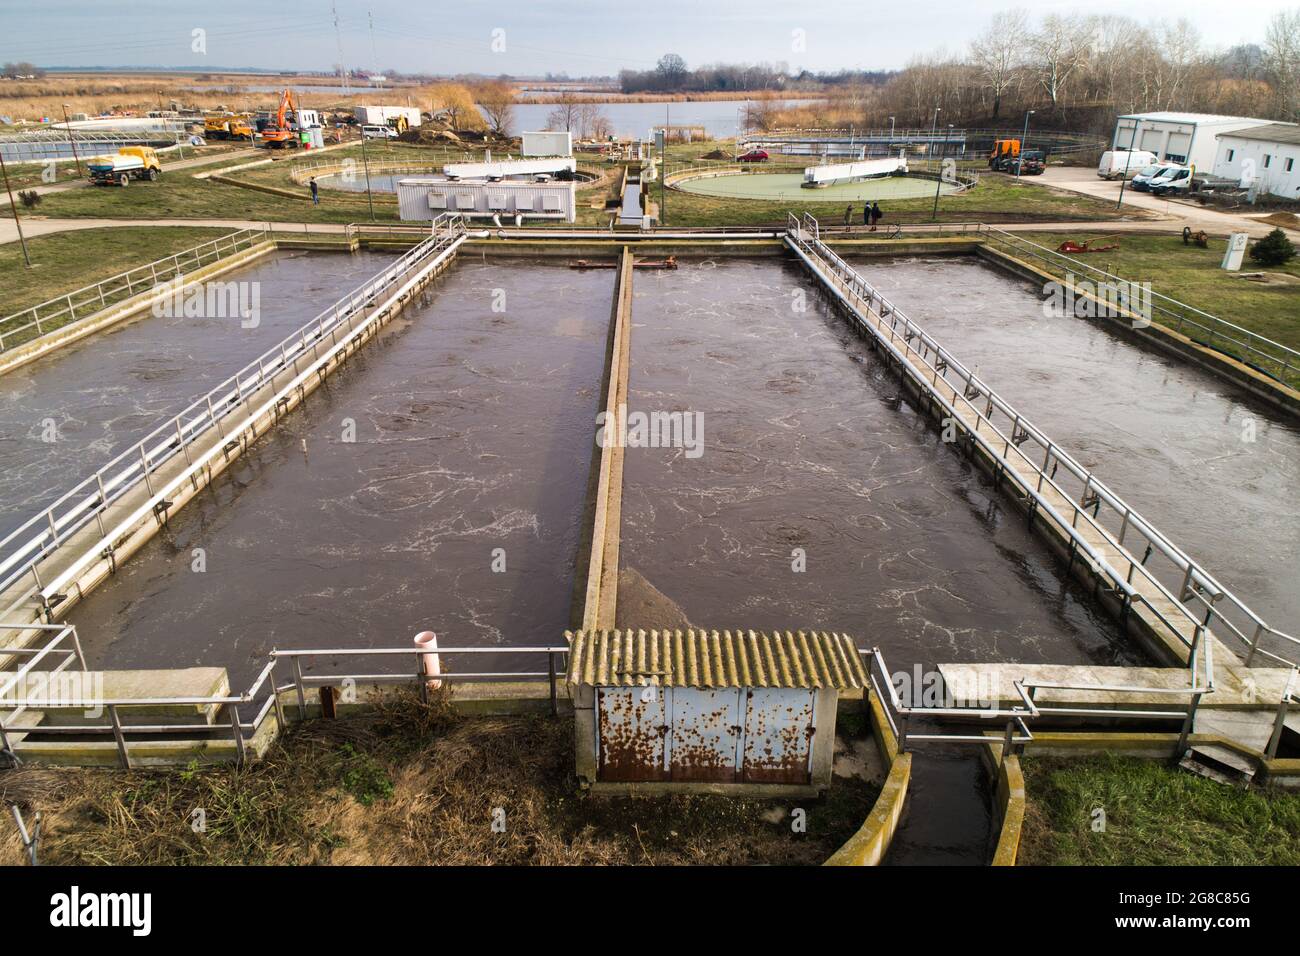 Water Treatment Facility Pools. Complete view of a waste water sewage treatment facility. Stock Photo